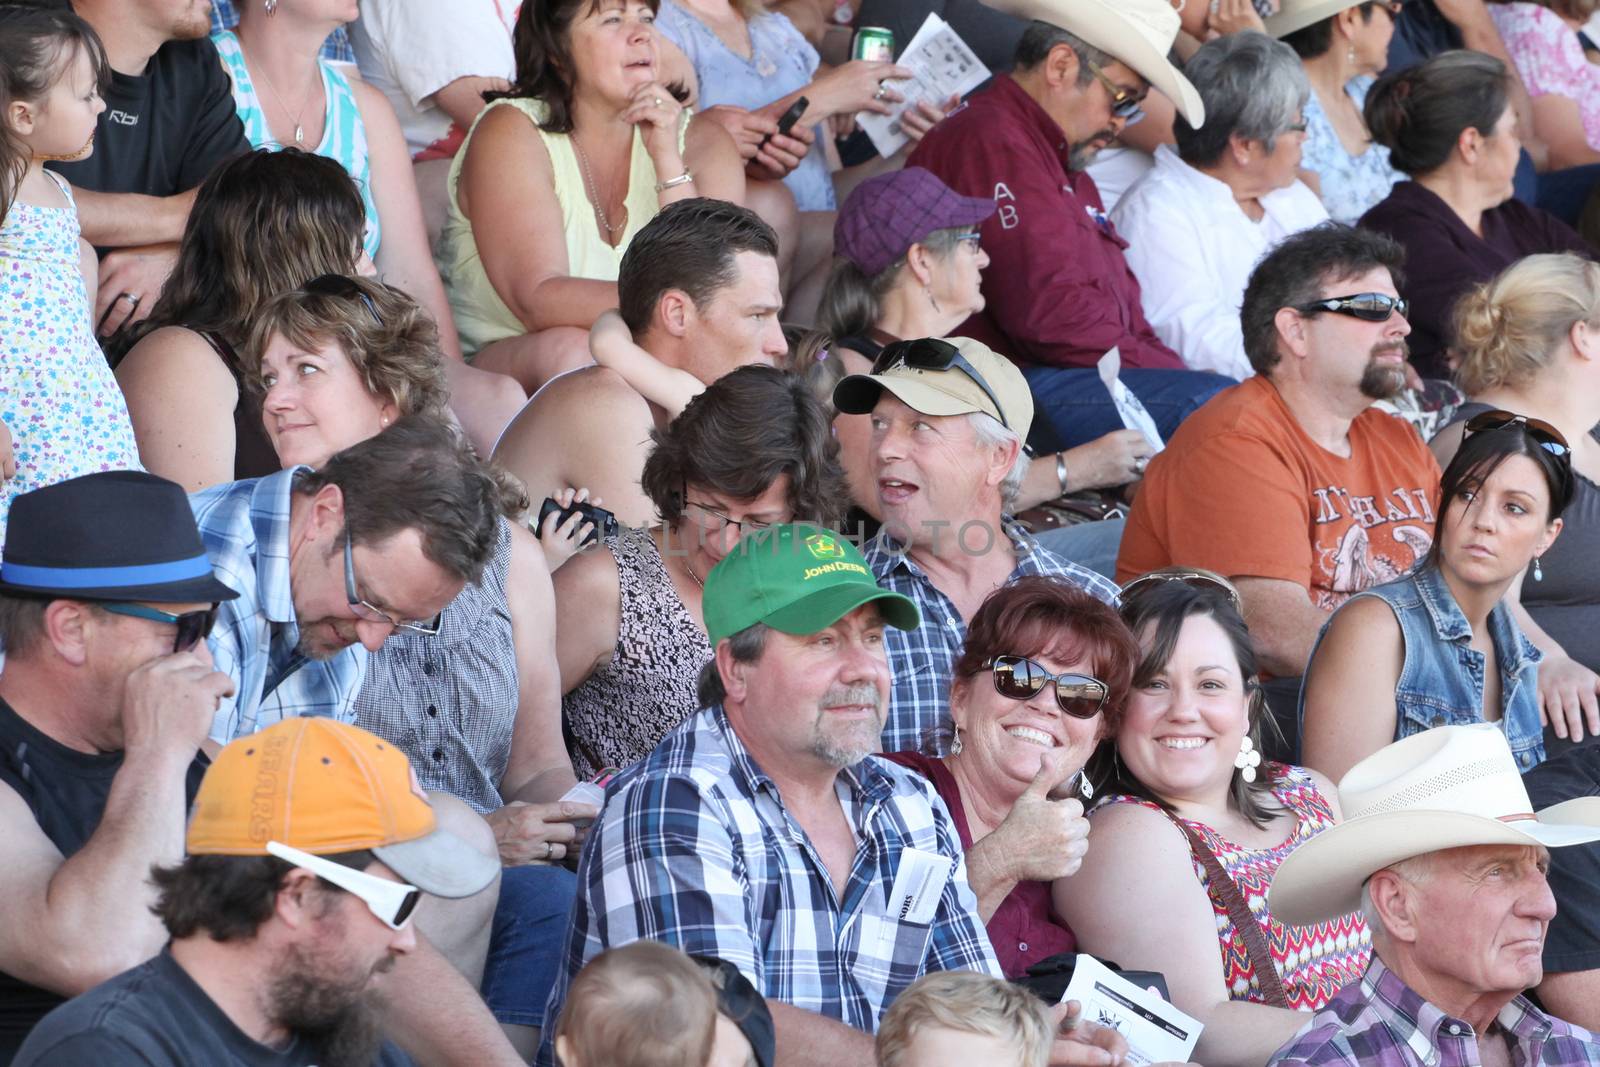 MERRITT, B.C. CANADA - May 30, 2015: Spectators at The 3rd Annual Ty Pozzobon Invitational PBR Event.